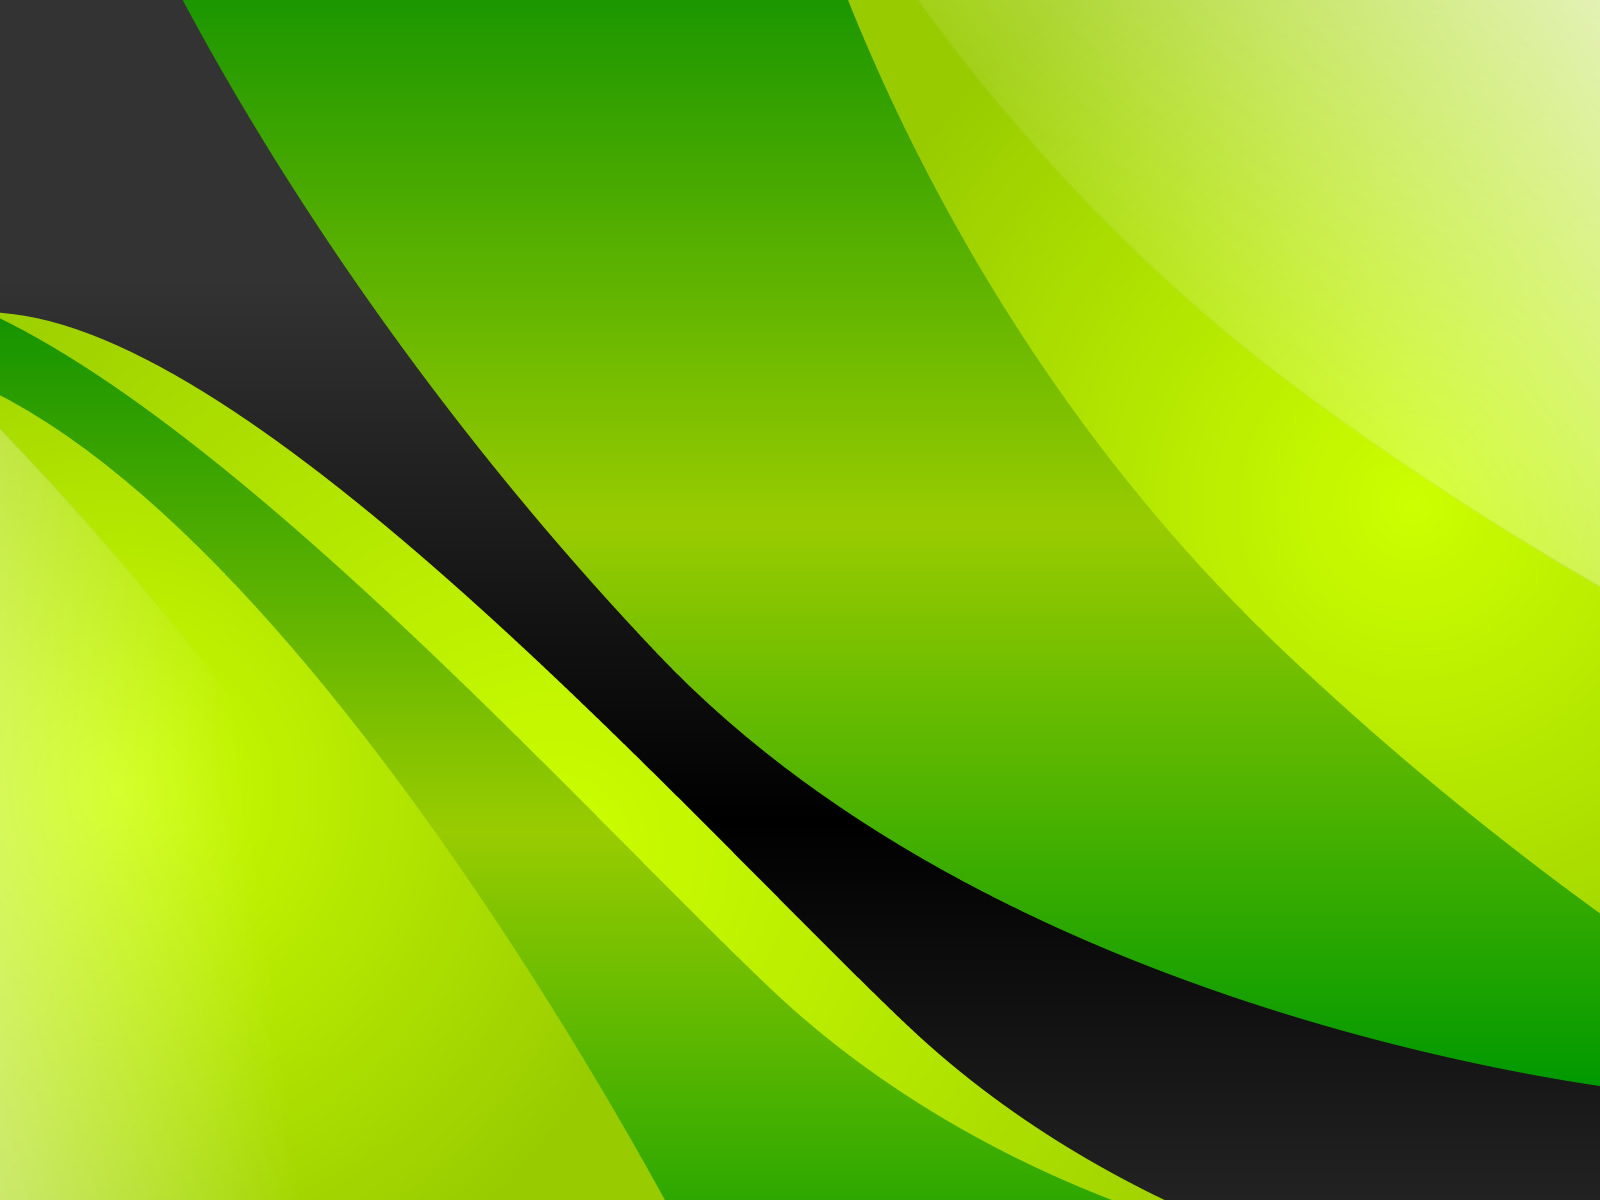 Black and White Wallpapers Green Yellow Abstract Wallpaper 1600x1200